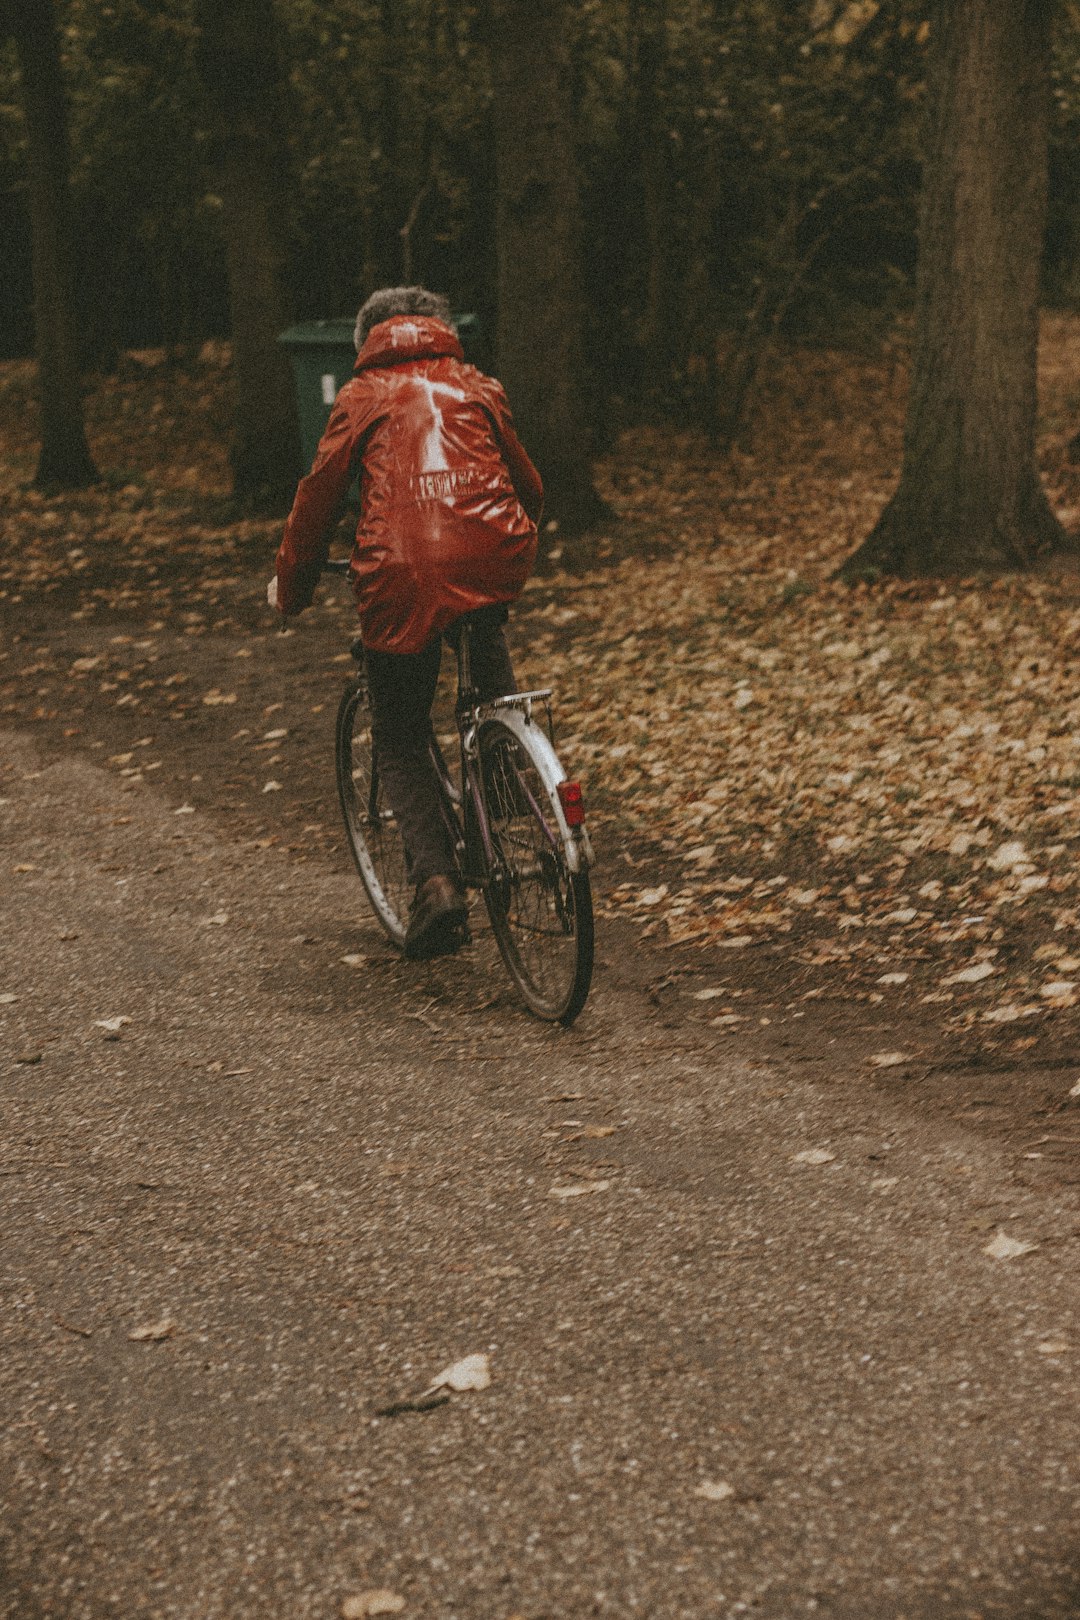 man in red jacket riding bicycle on dirt road during daytime